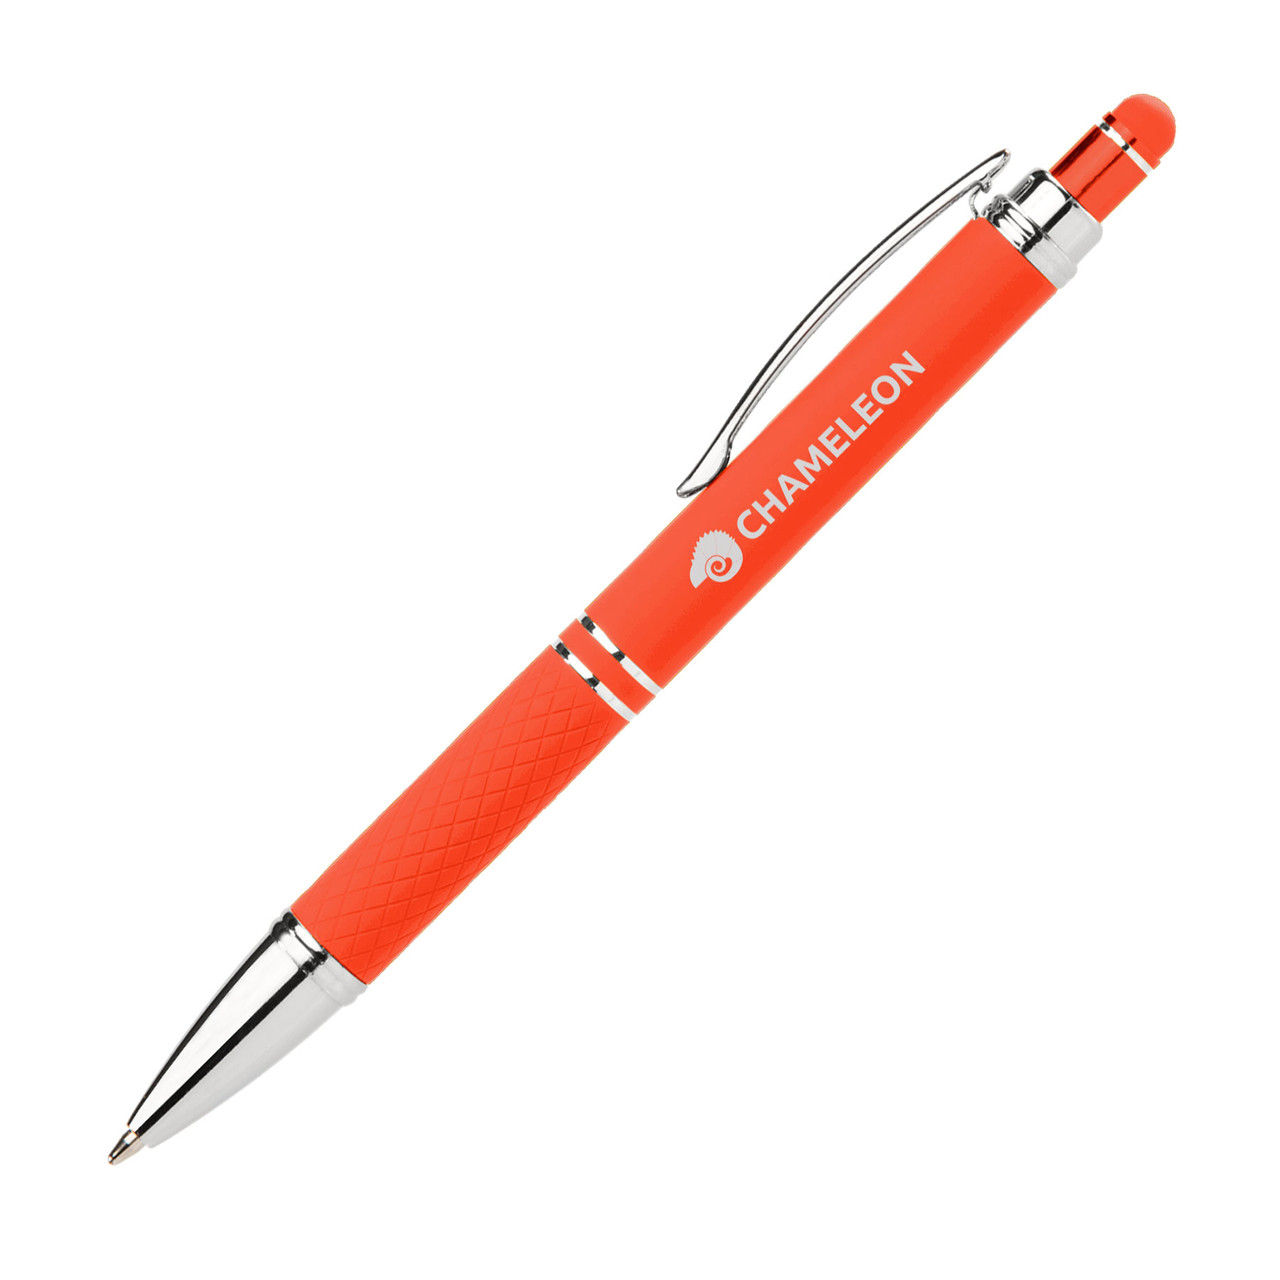 Phoenix Softy Brights Gel Pen with Stylus - Laser Engraved